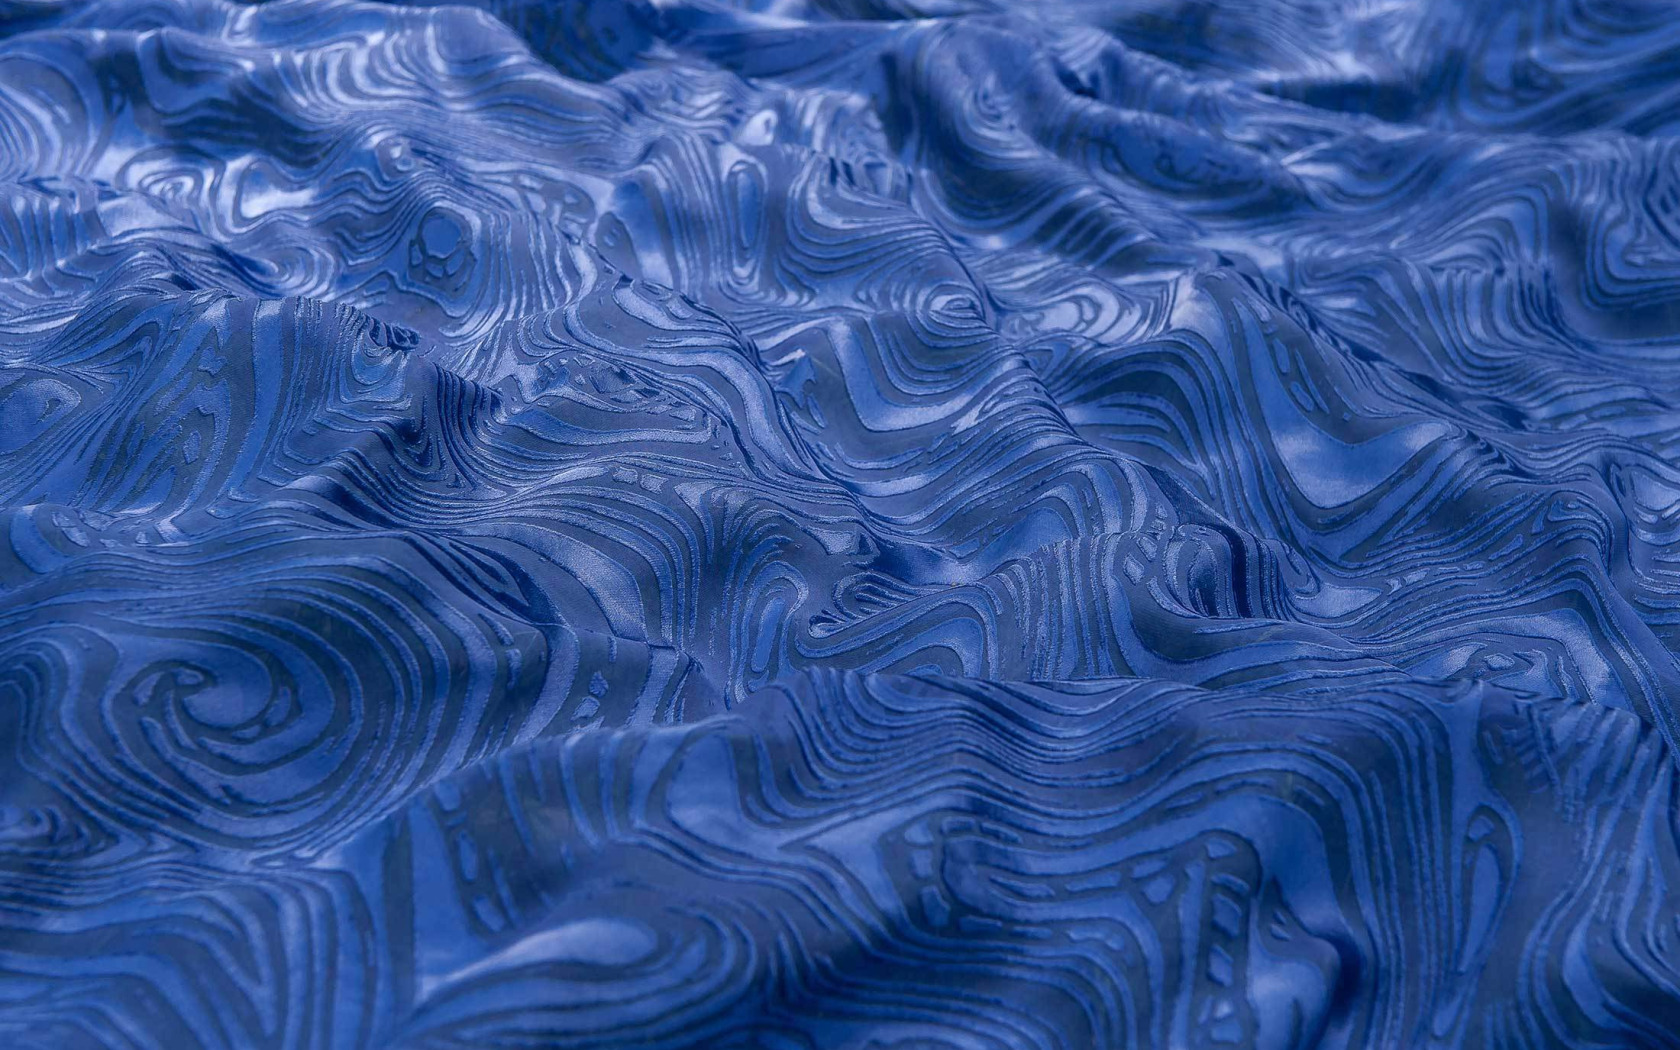 Download wallpaper wave, blue, pattern, fabric, folds, silk, textiles, sect...